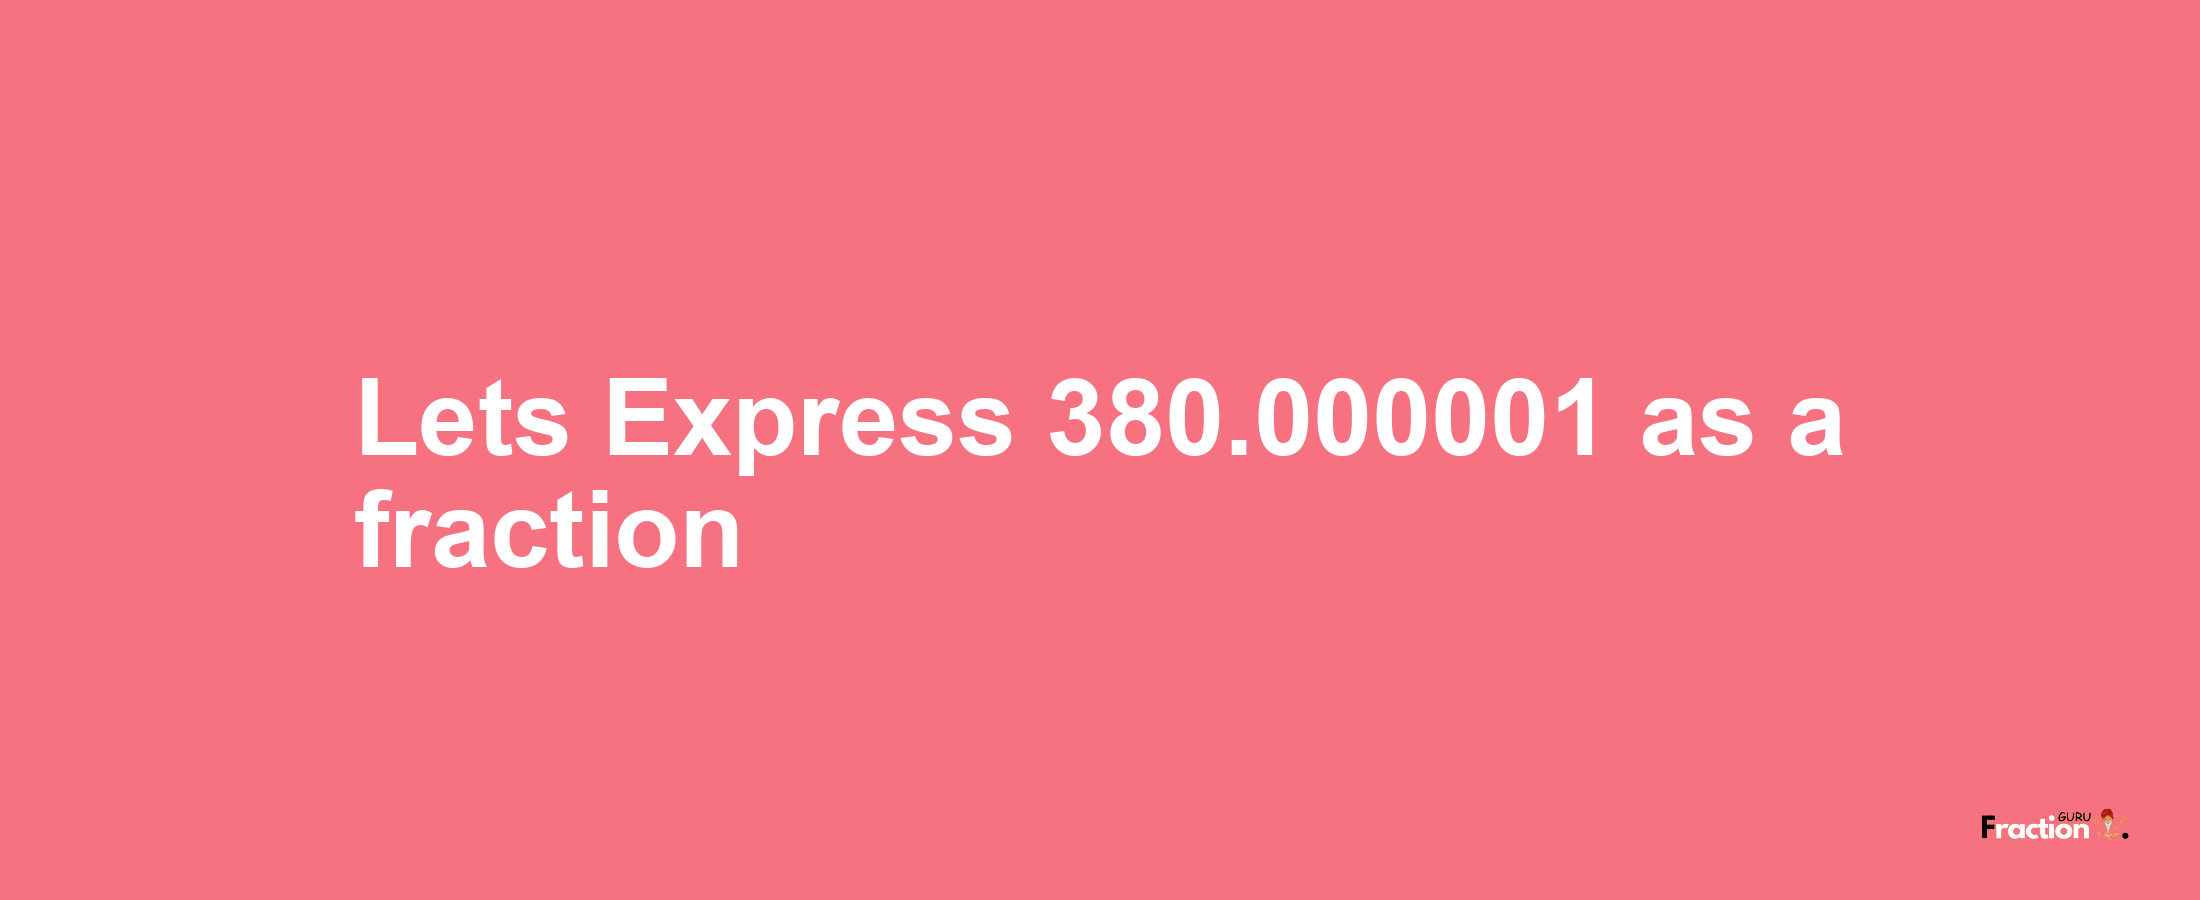 Lets Express 380.000001 as afraction